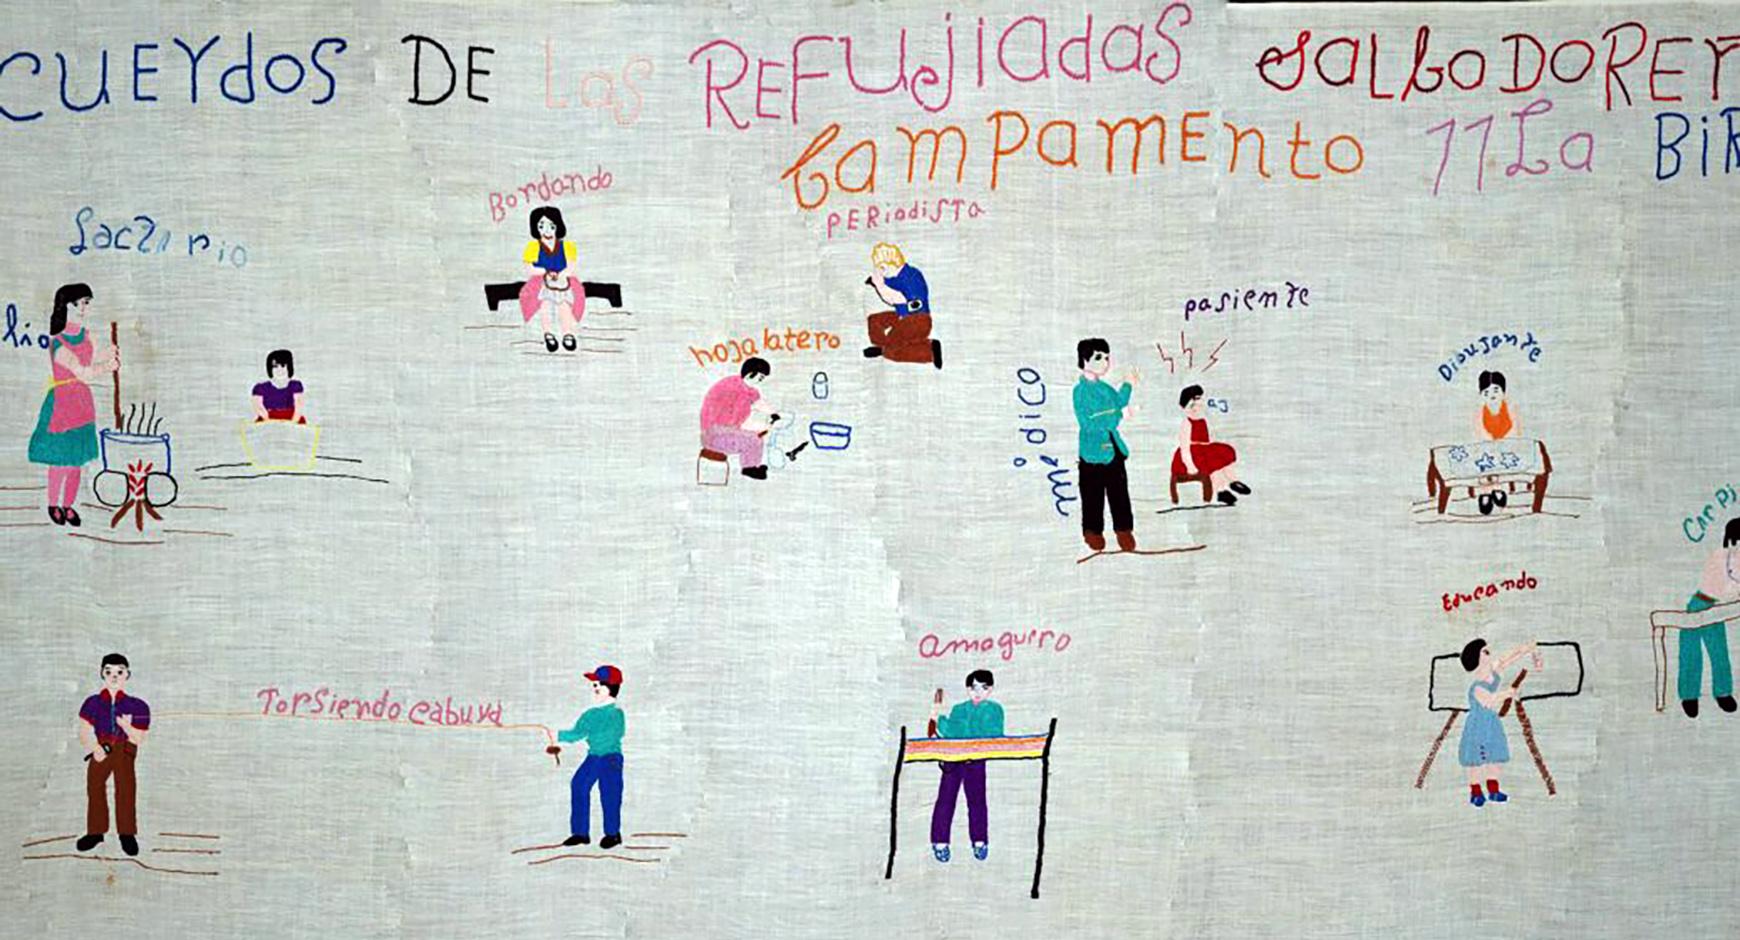 Embroidered piece remembering a Salvadoran refugee camp and the people and activities associated with it.